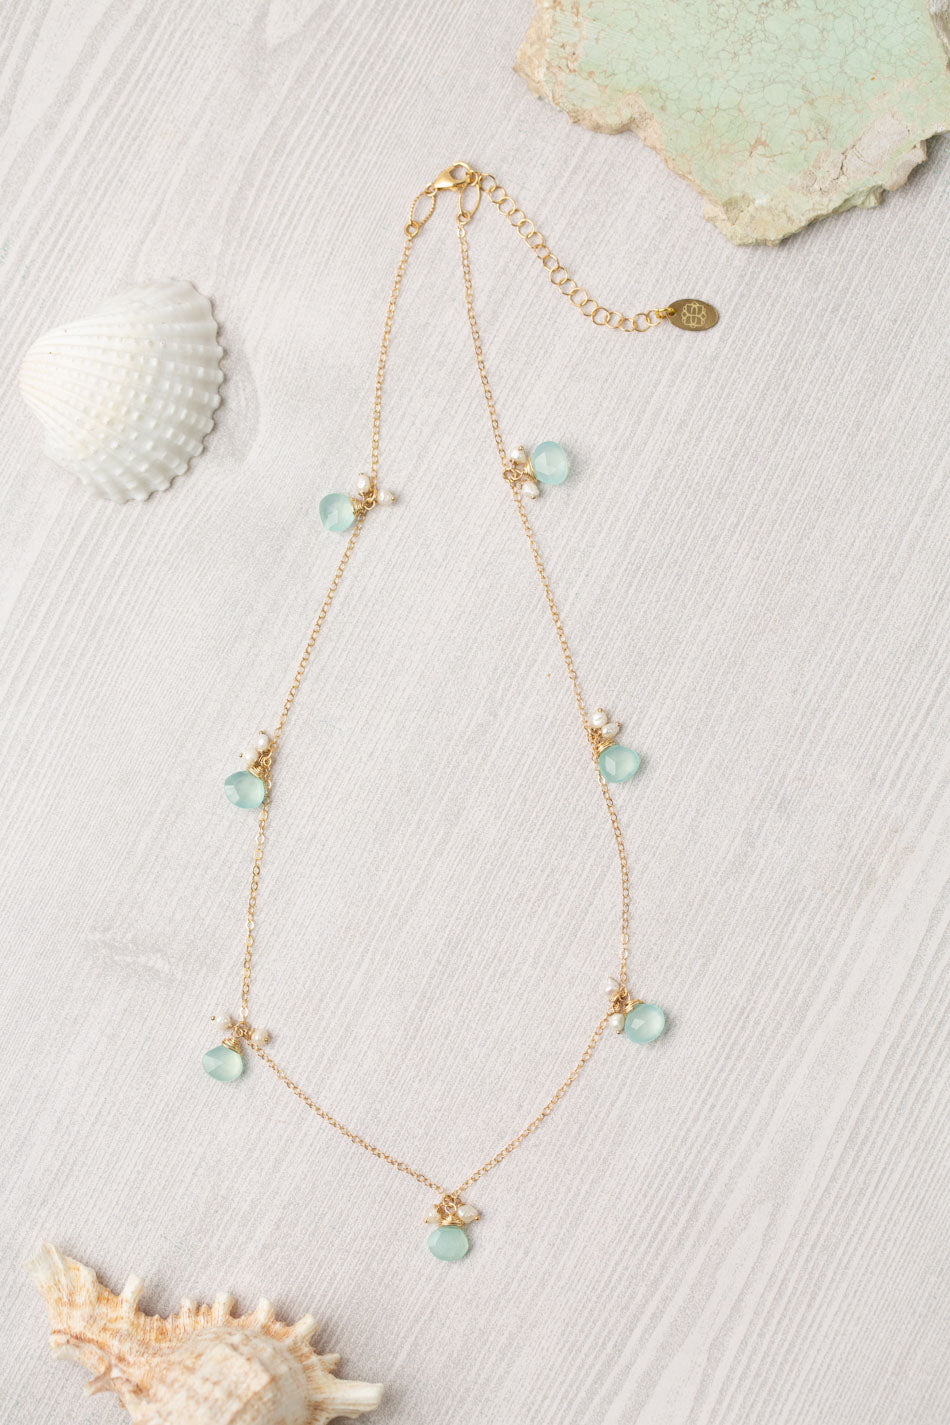 Limited Edition 17.5-19.5" Freshwater Pearl With Seafoam Blue/Green Chalcedony Briolettes Simple Necklace